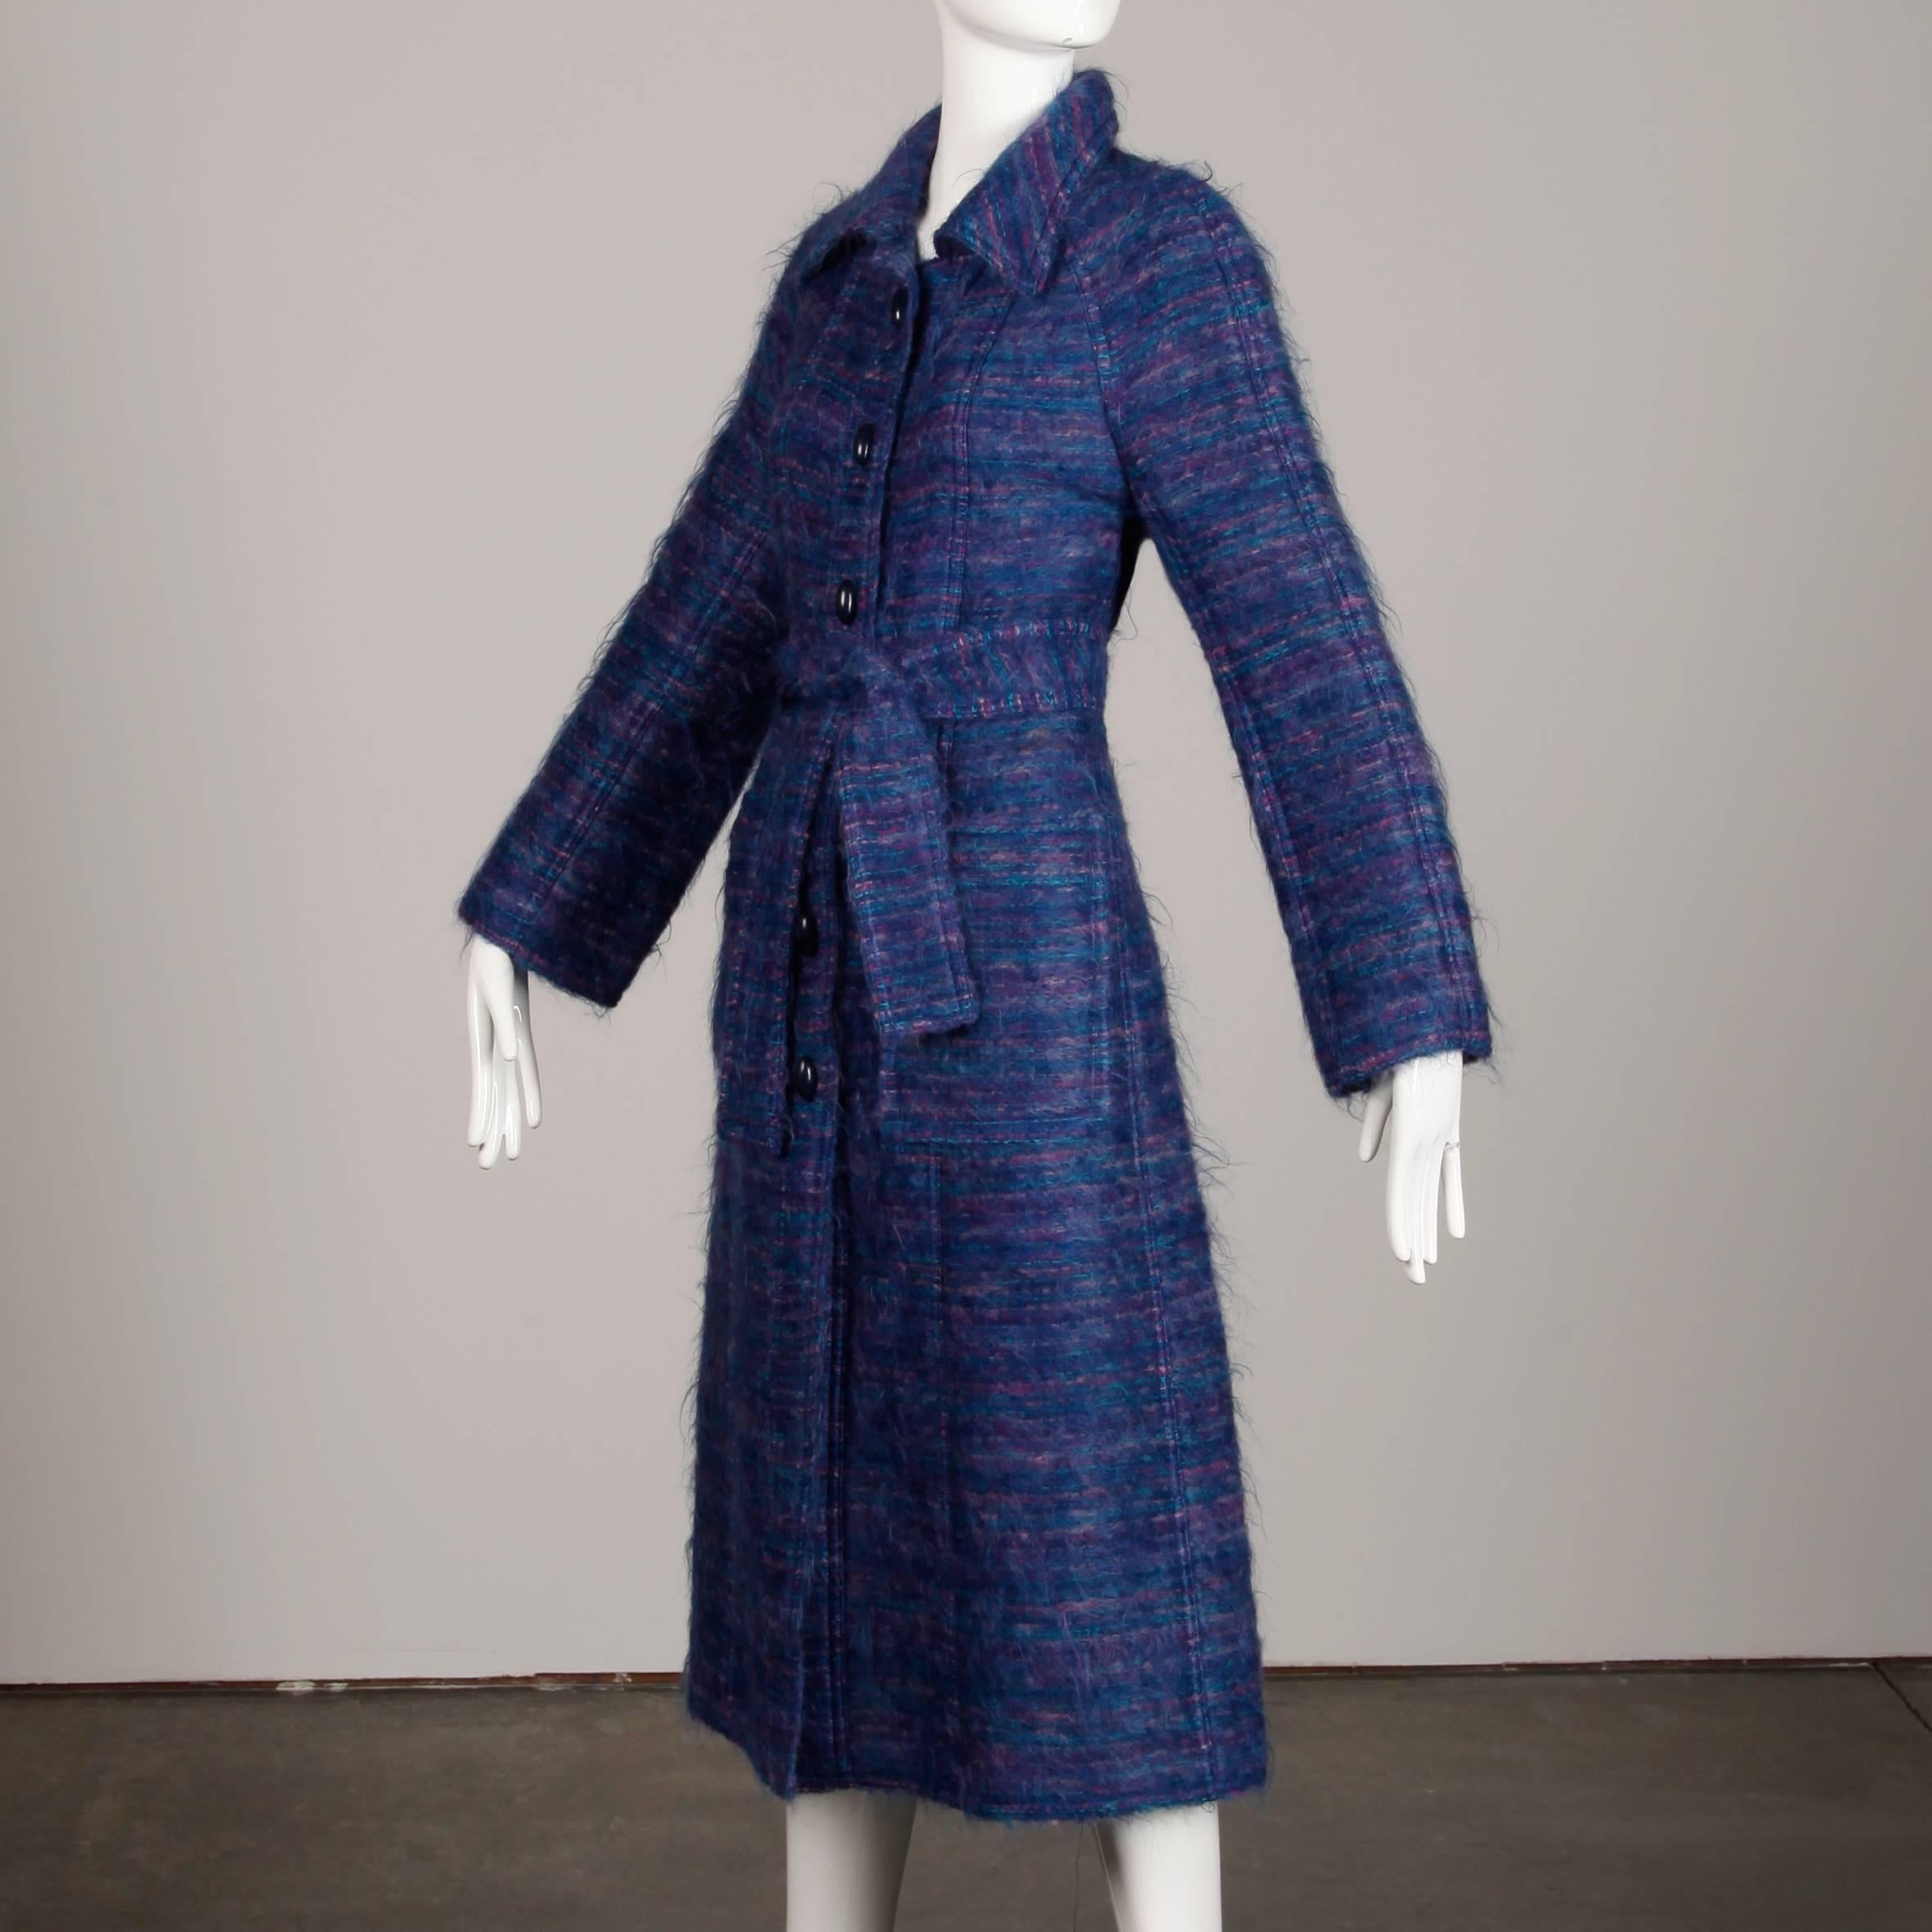 Gorgeous vintage Bernard Perris coat in purple and blue woven mohair with matching tie sash belt. Partially lined with front button and tie closure. Side patch pockets. The bust measures 38